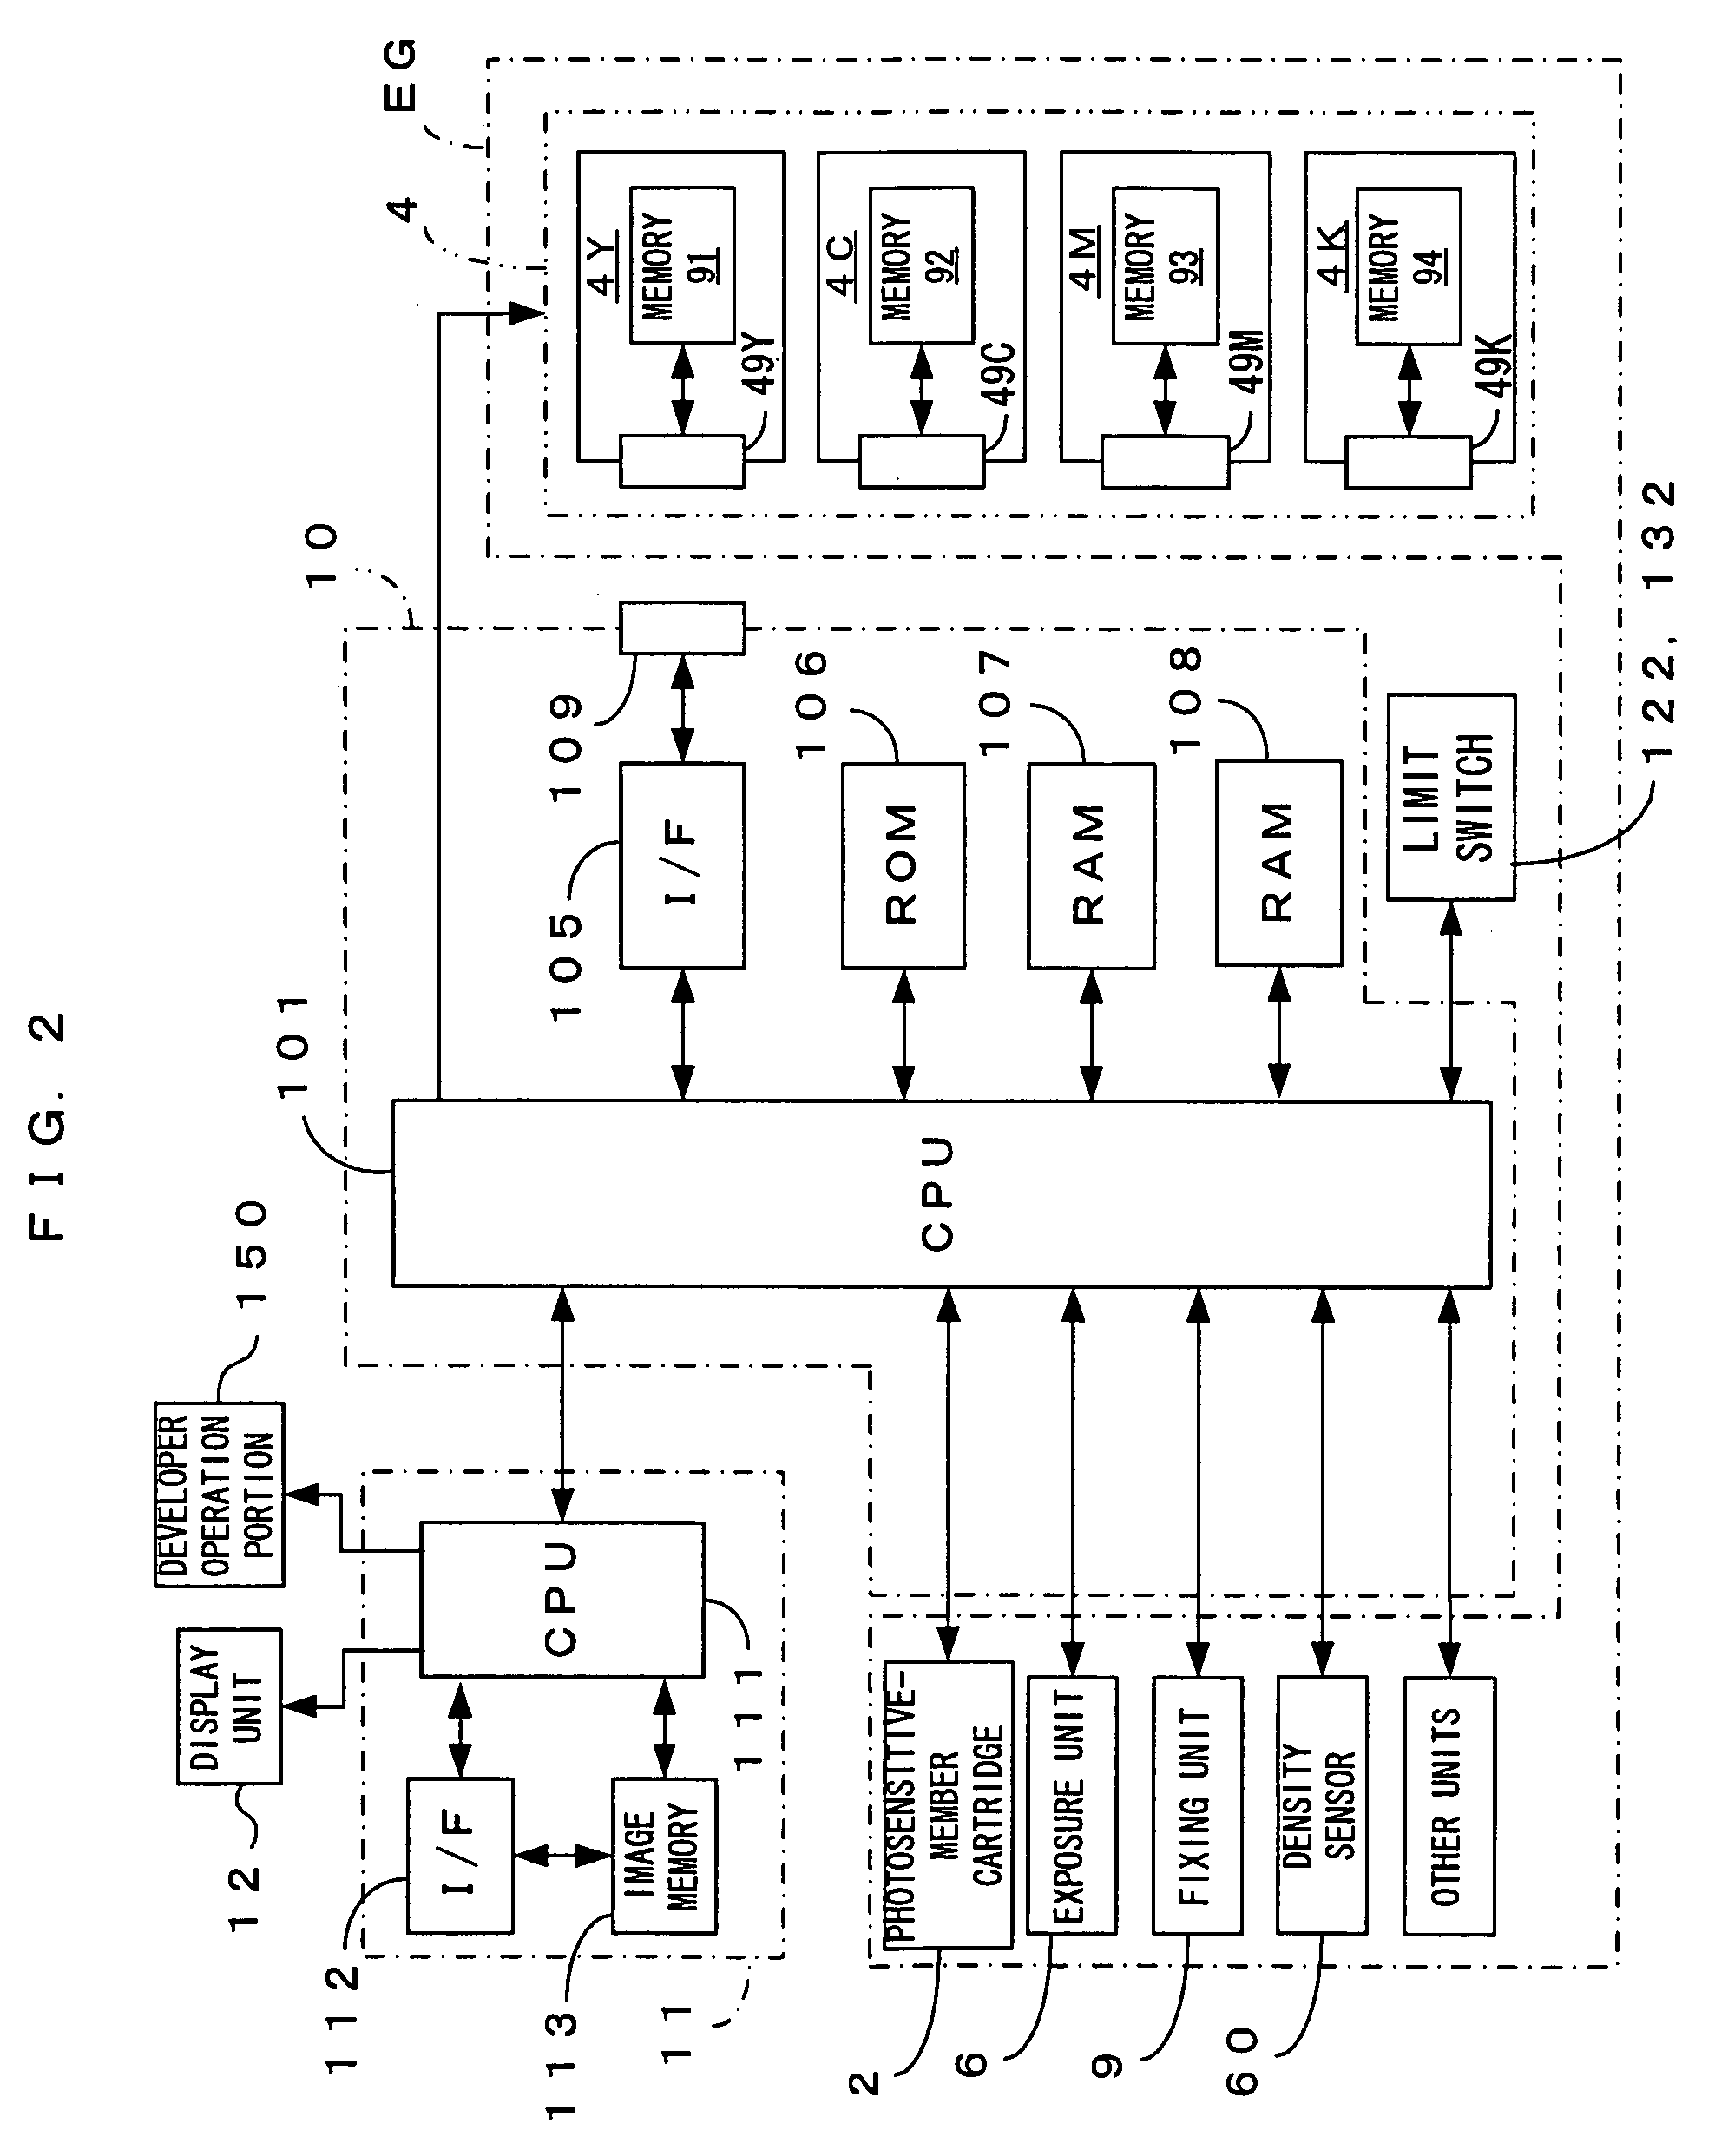 Image forming apparatus and method including canceling a power save mode